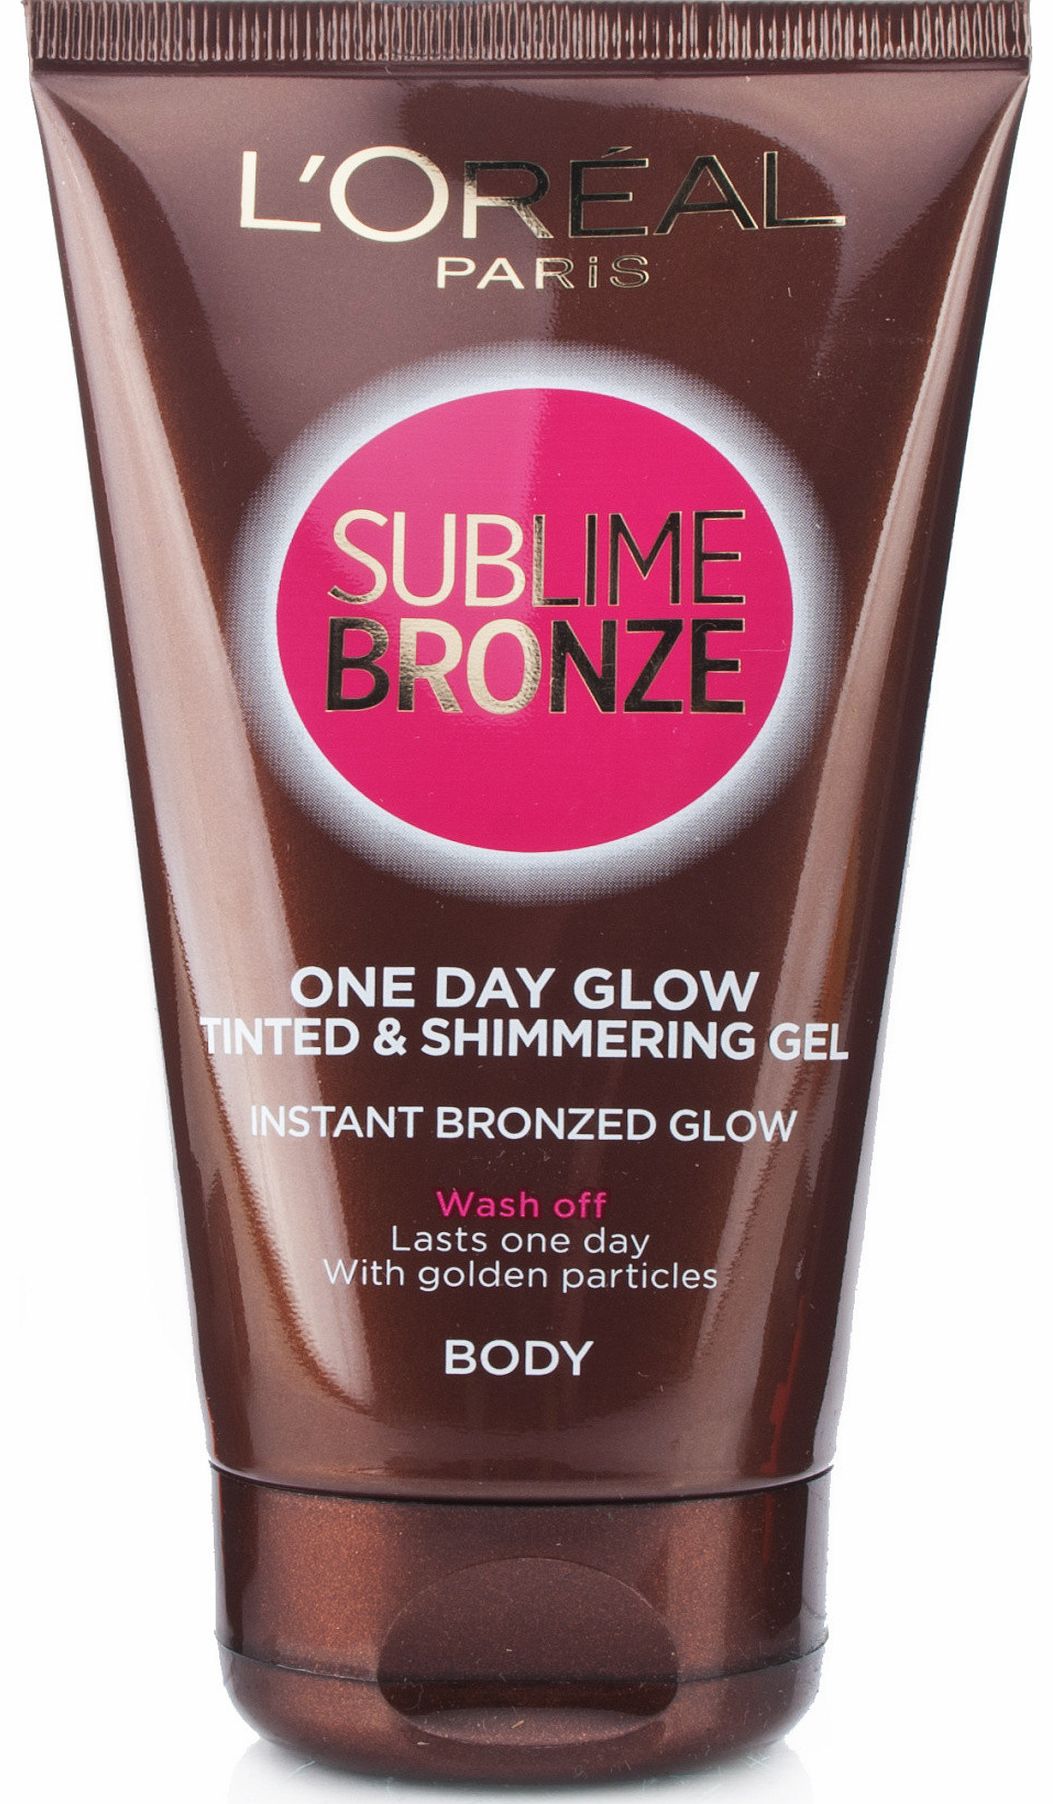 L'Oreal Sublime Bronze One Day Glow 150ml